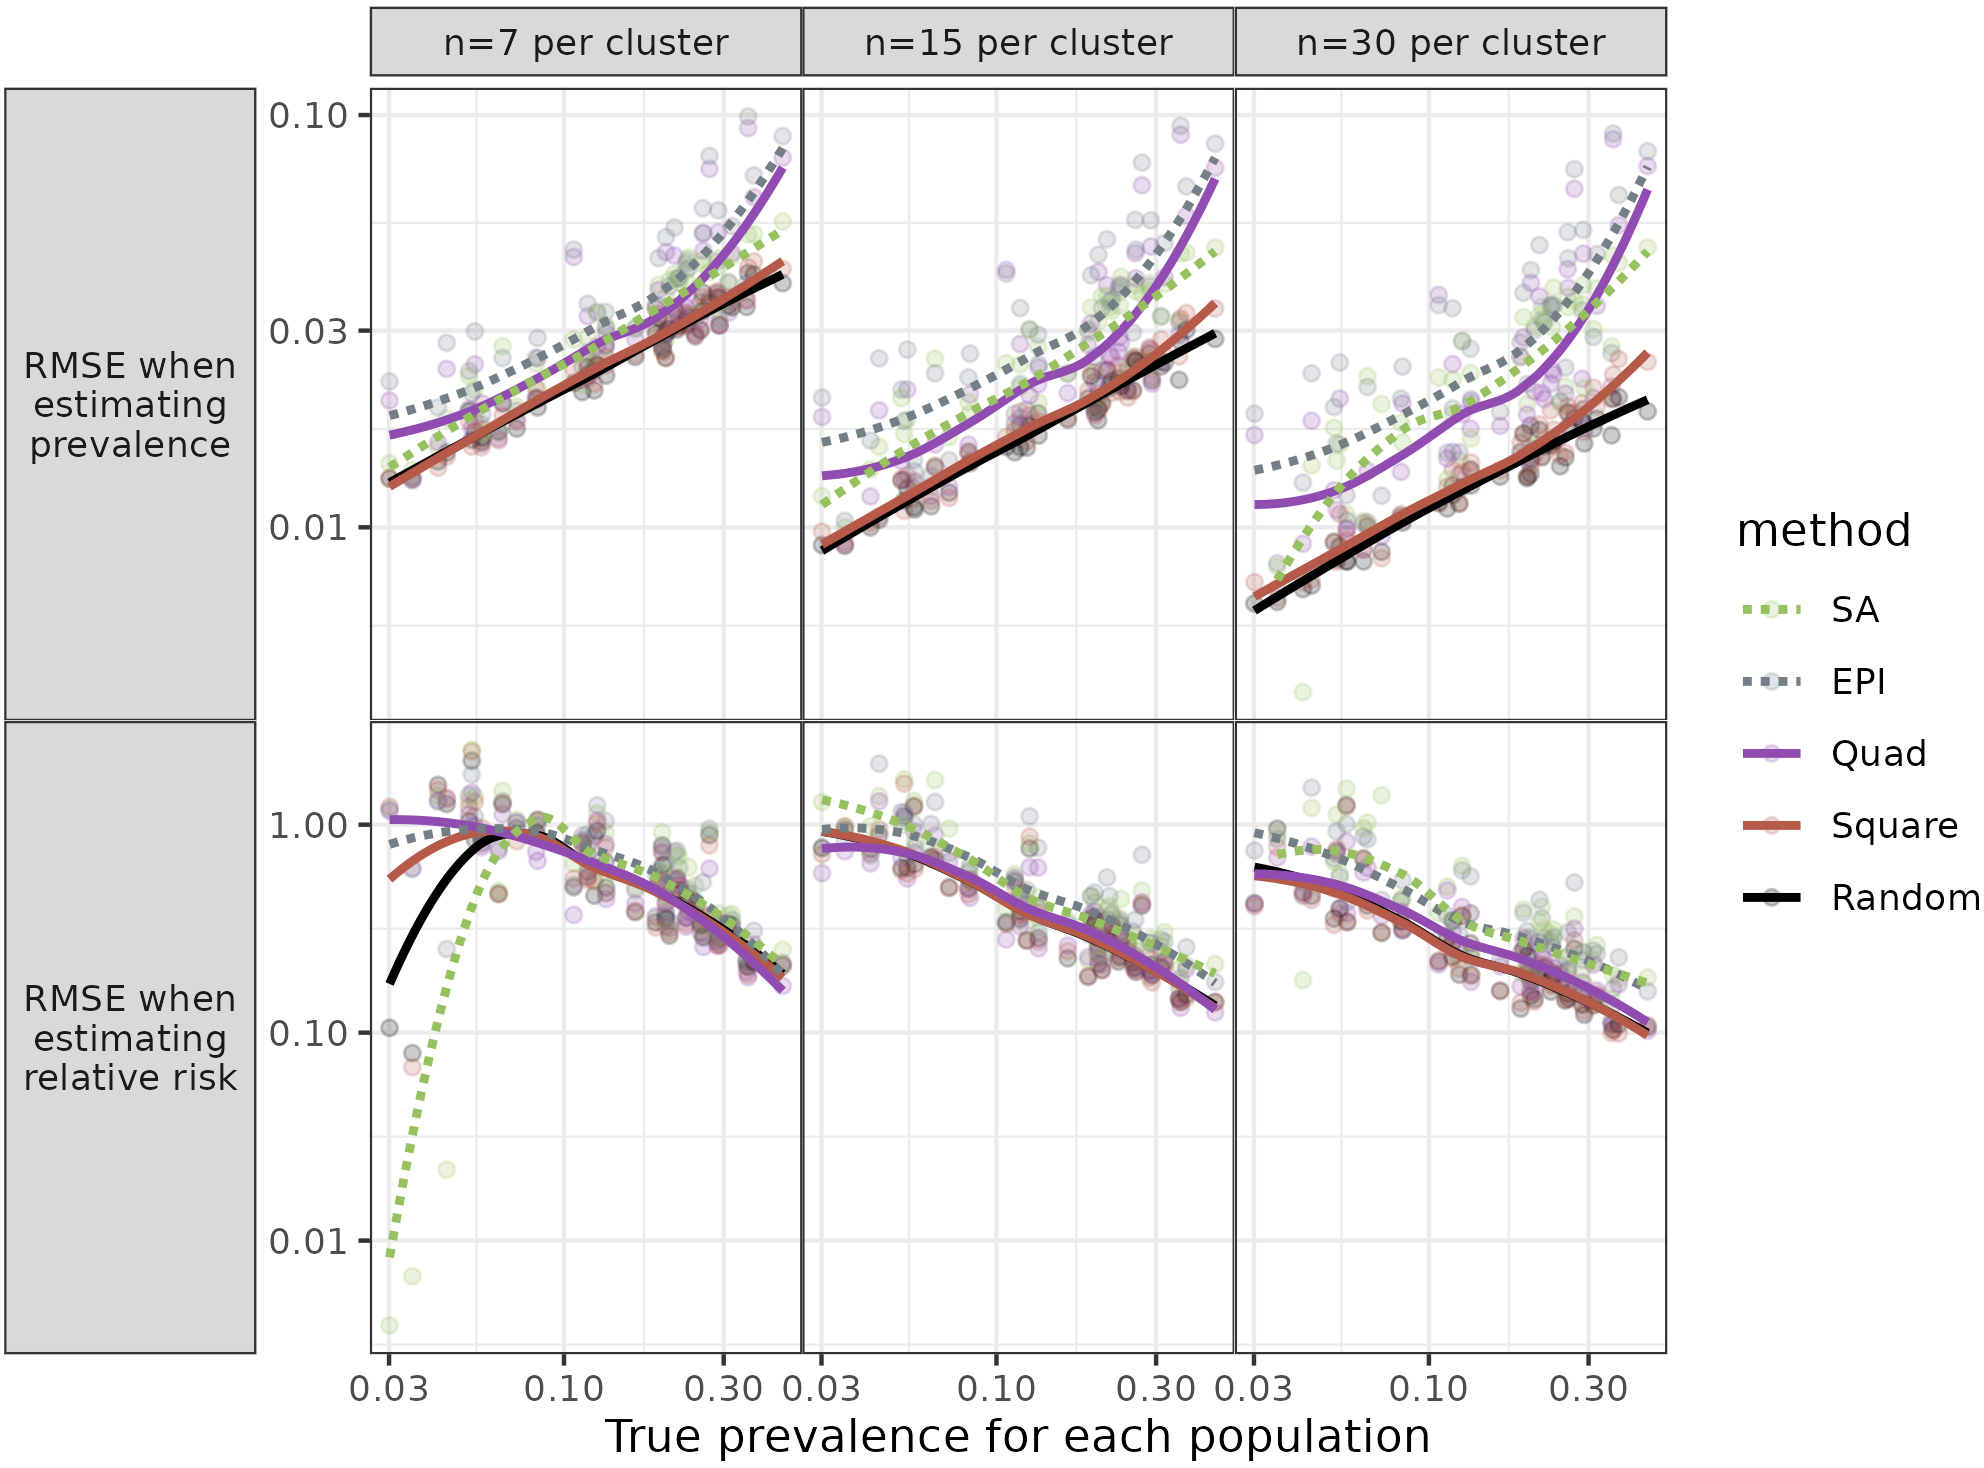 Root Mean Square Error (RMSE) for each population against prevalence. Figure shows RMSE for three sample sizes, when the same towns were sampled for each simulation and relative risk (RR) = 1.0. PSU = Primary Sampling Unit.